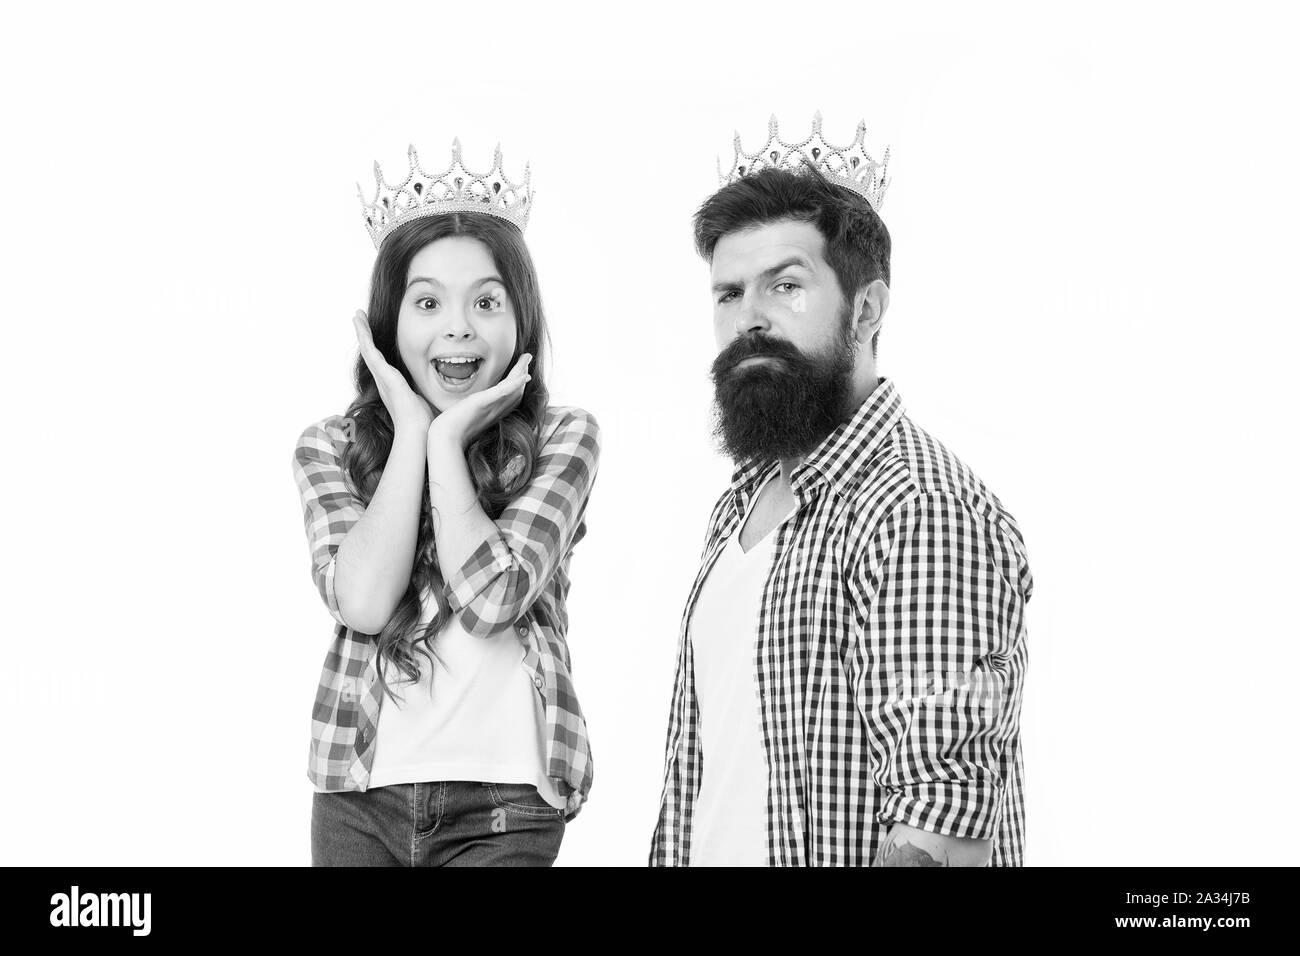 Princess girl father Black and White Stock Photos & Images - Alamy